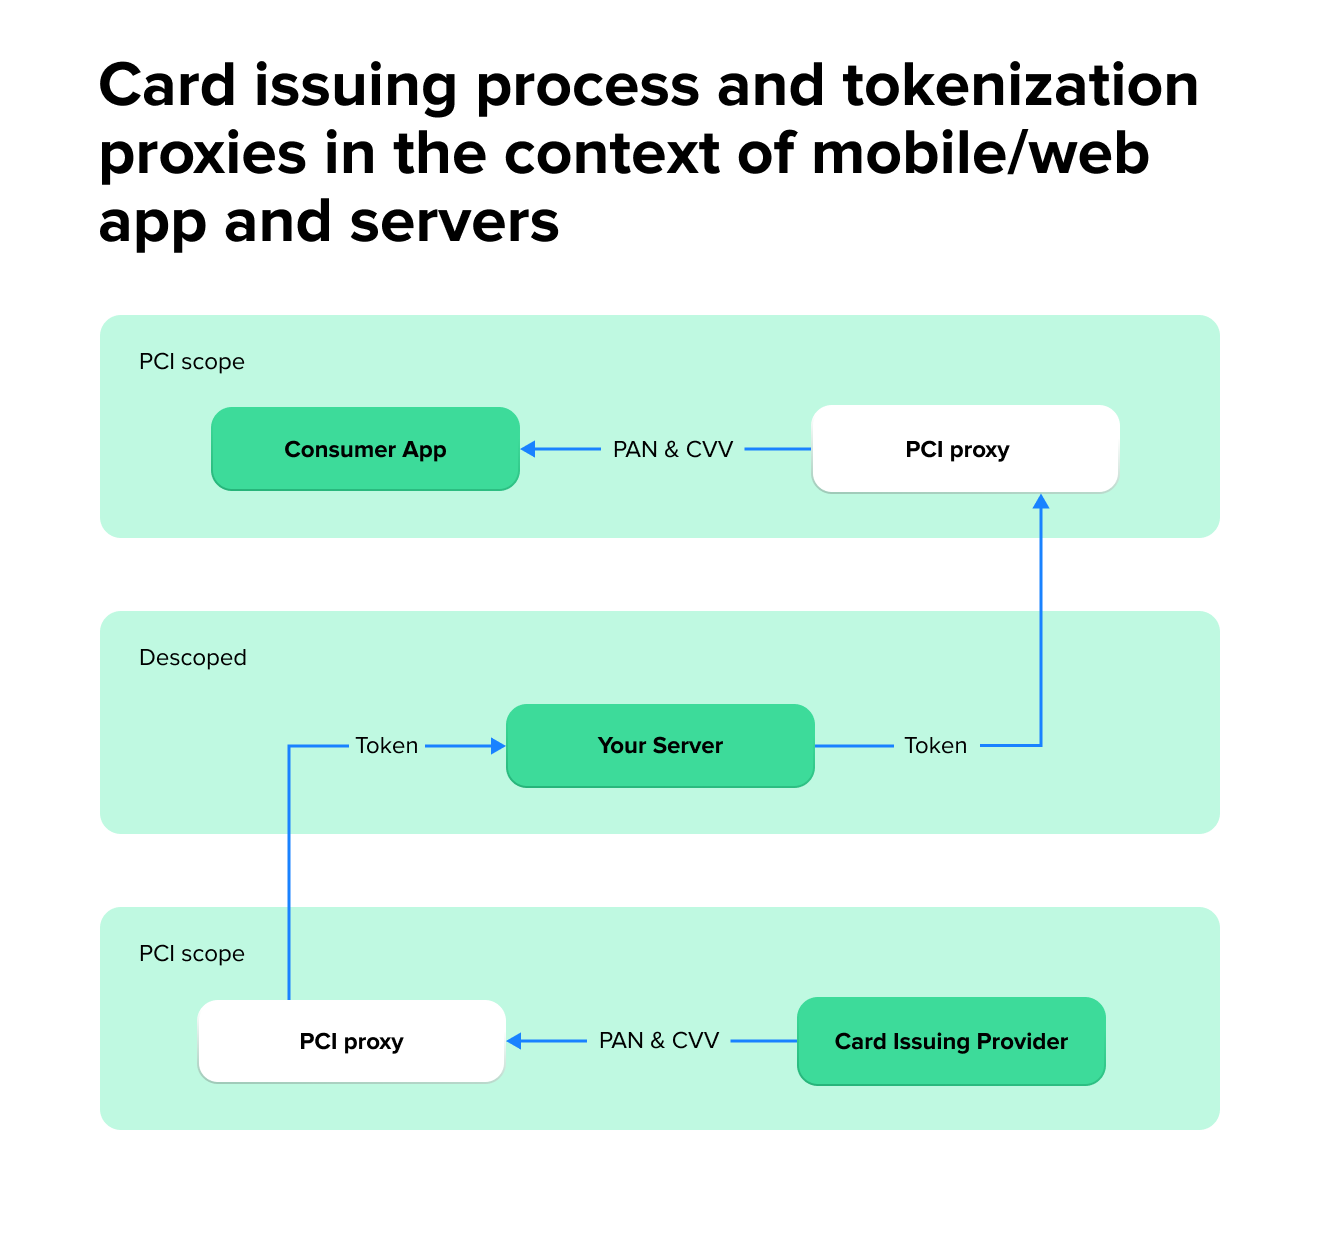 PAN & CVV card issuance journey to a proxy for tokenization through backend and detokenization and reaching end user app